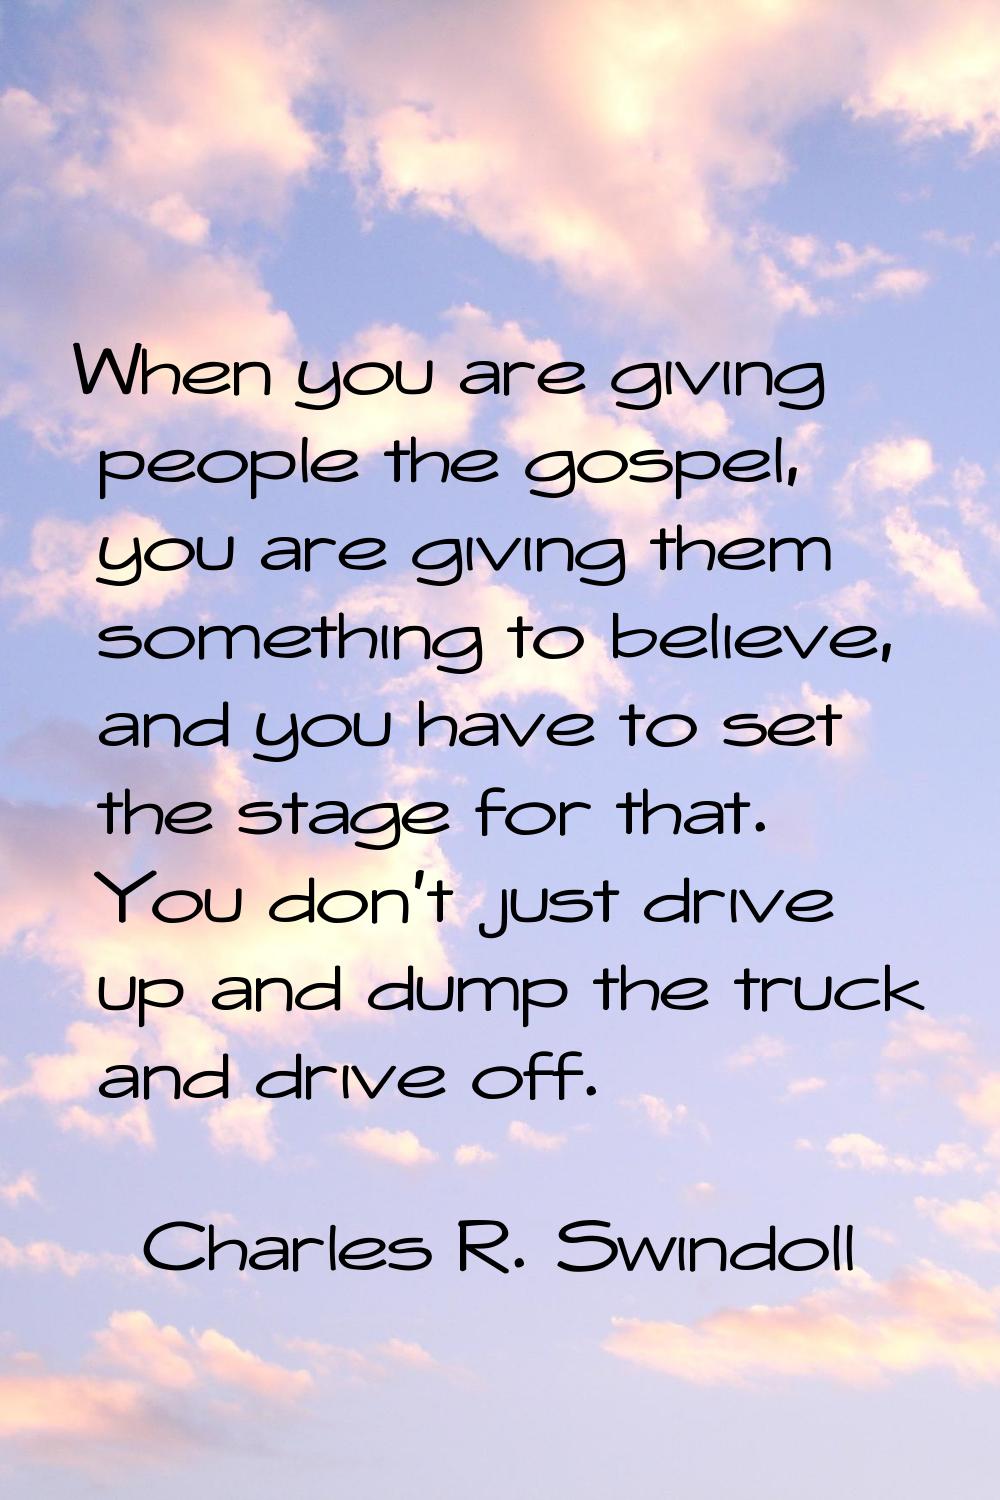 When you are giving people the gospel, you are giving them something to believe, and you have to se